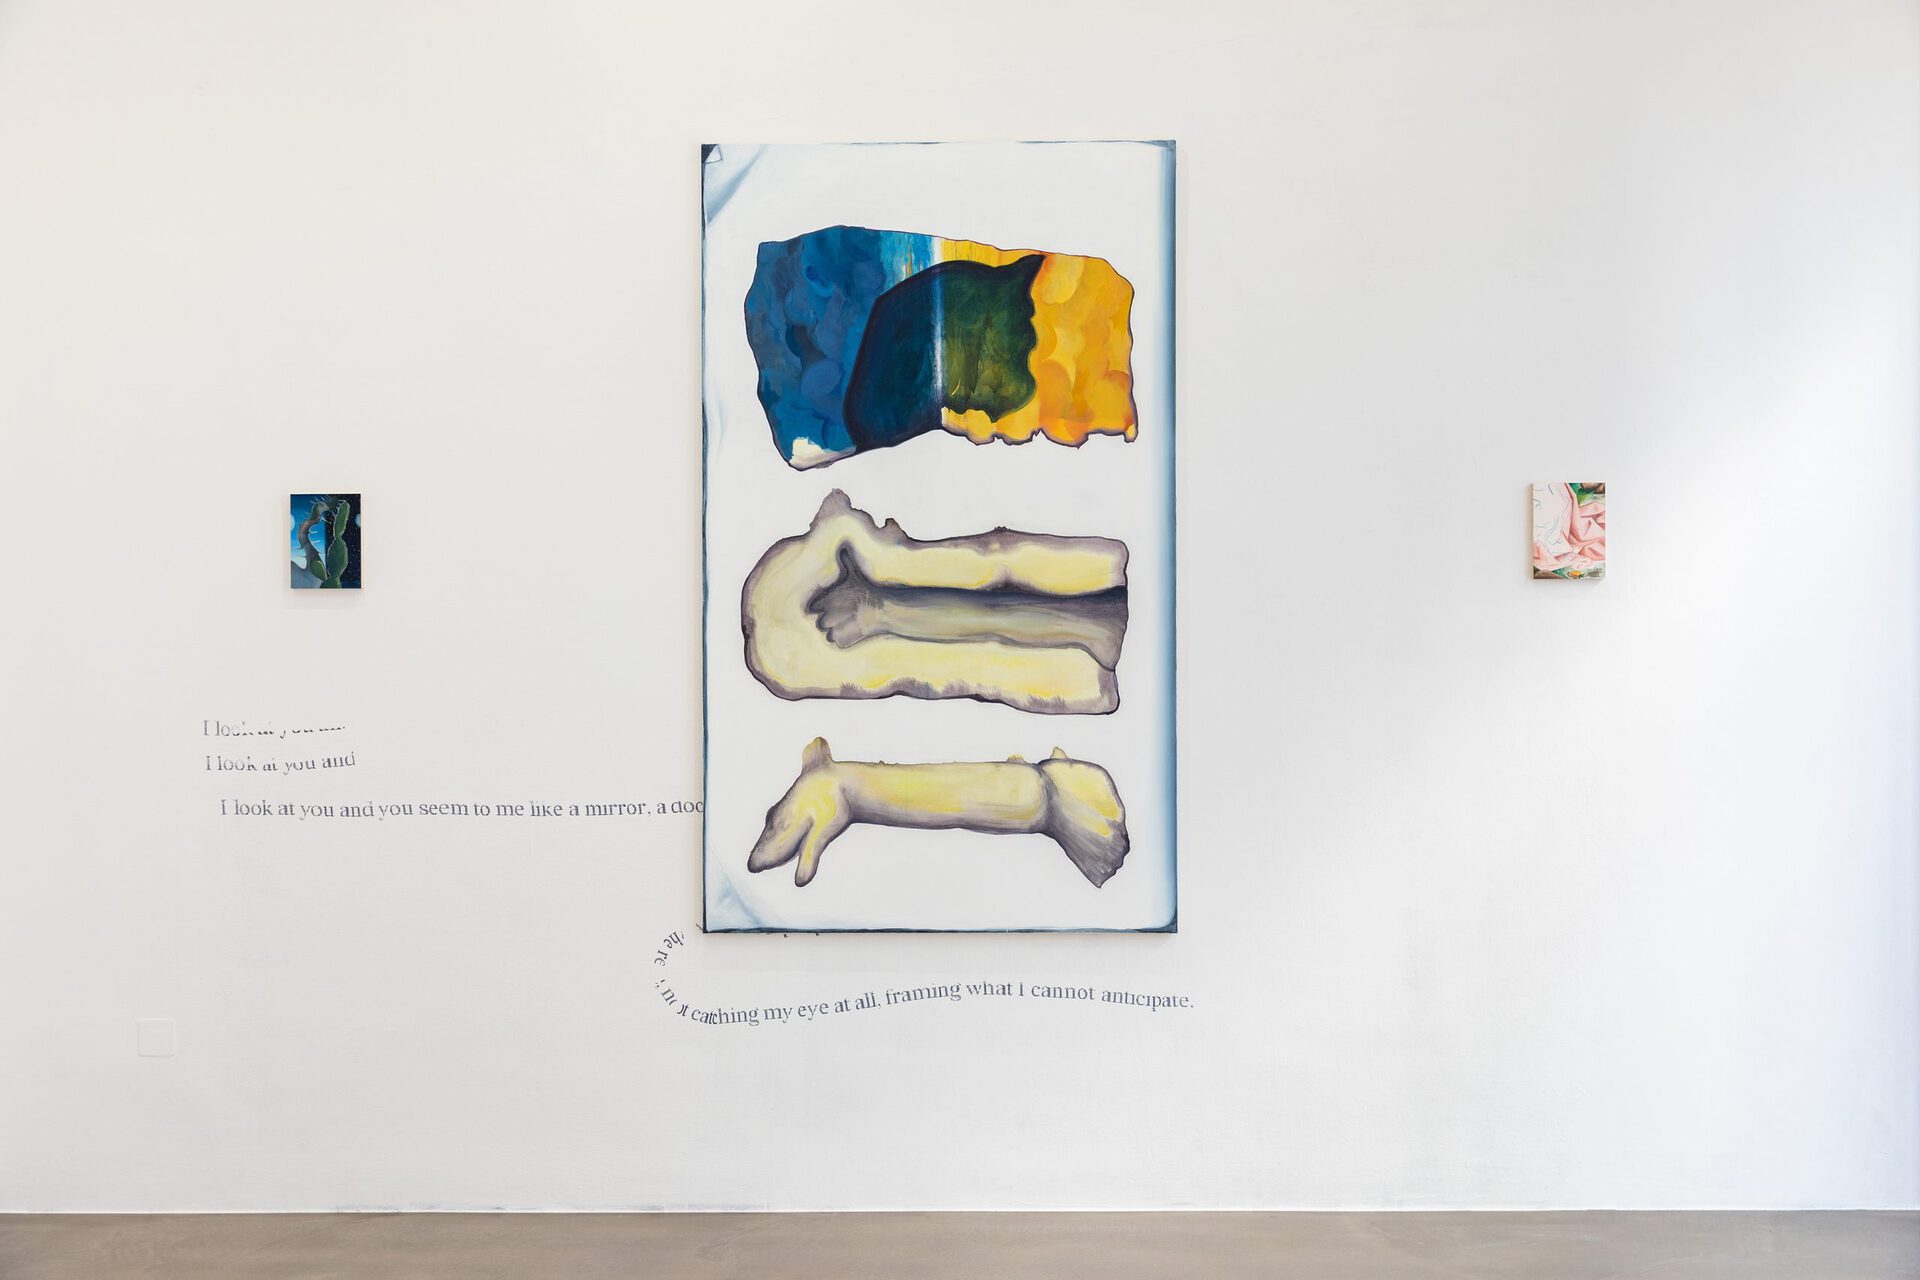 Titania Seidl, two and a half fossilized gestures, 2021, 200x120 cm, watercolor and oil on canvas, installation view